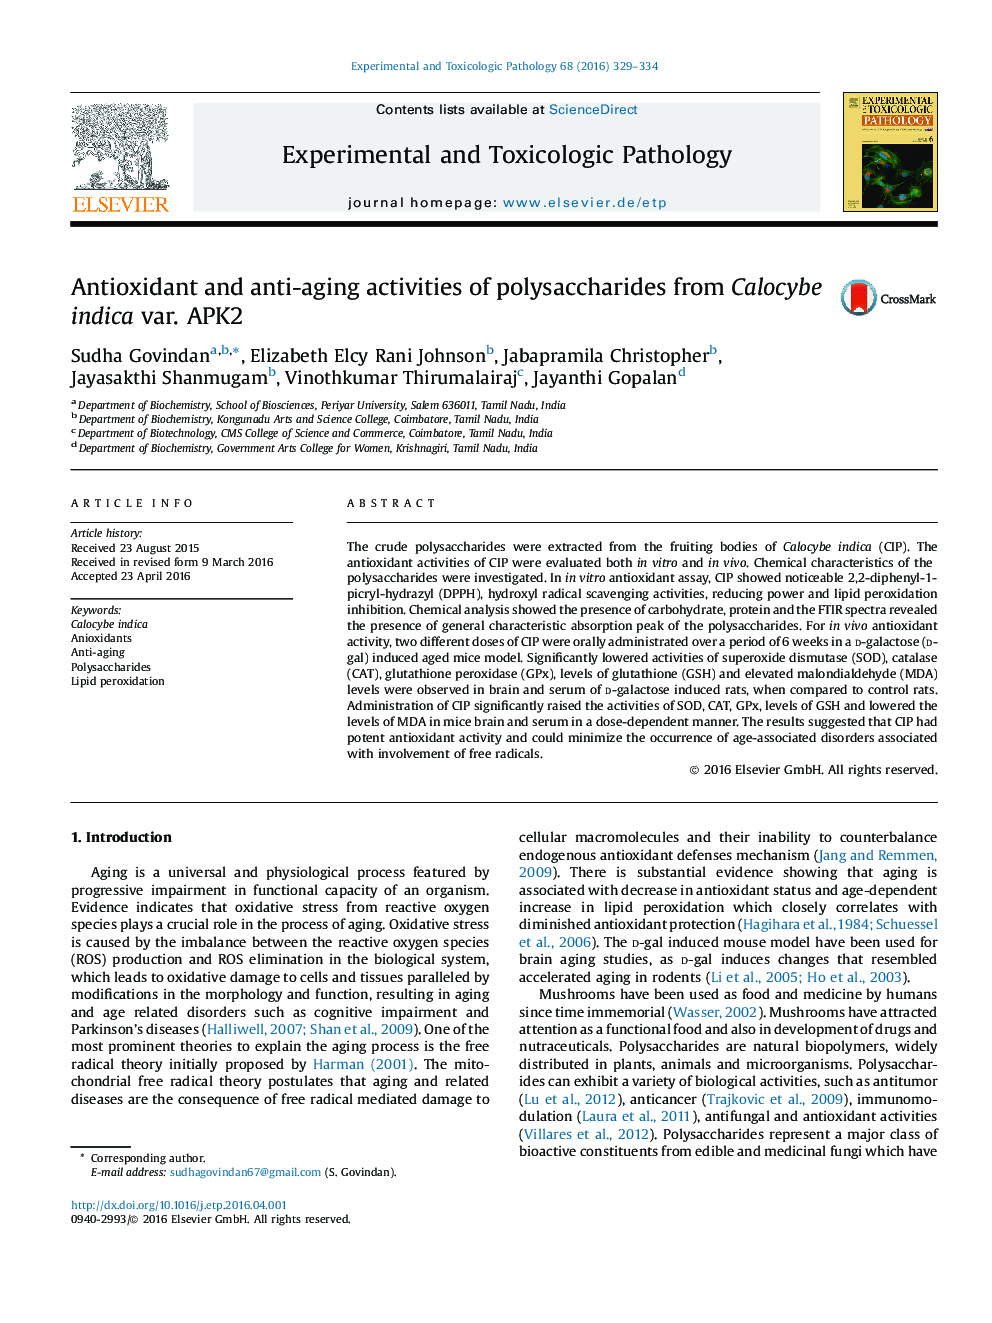 Antioxidant and anti-aging activities of polysaccharides from Calocybe indica var. APK2